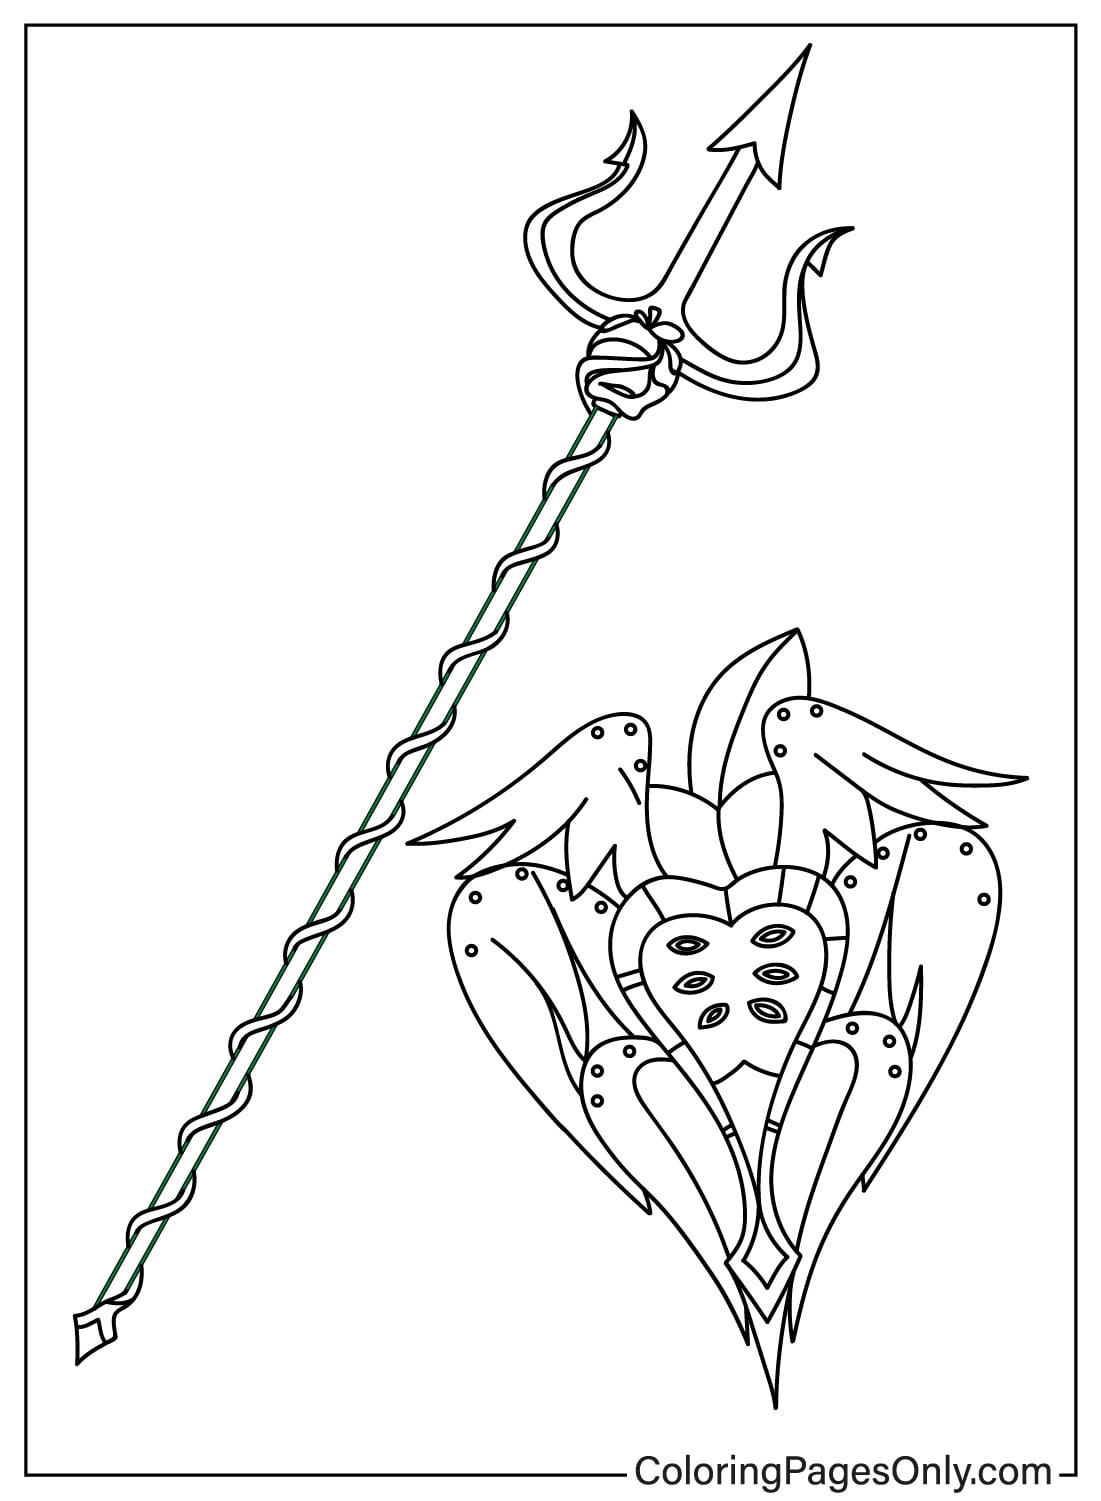 Charlie’s Shield Coloring Pages from Hazbin Hotel